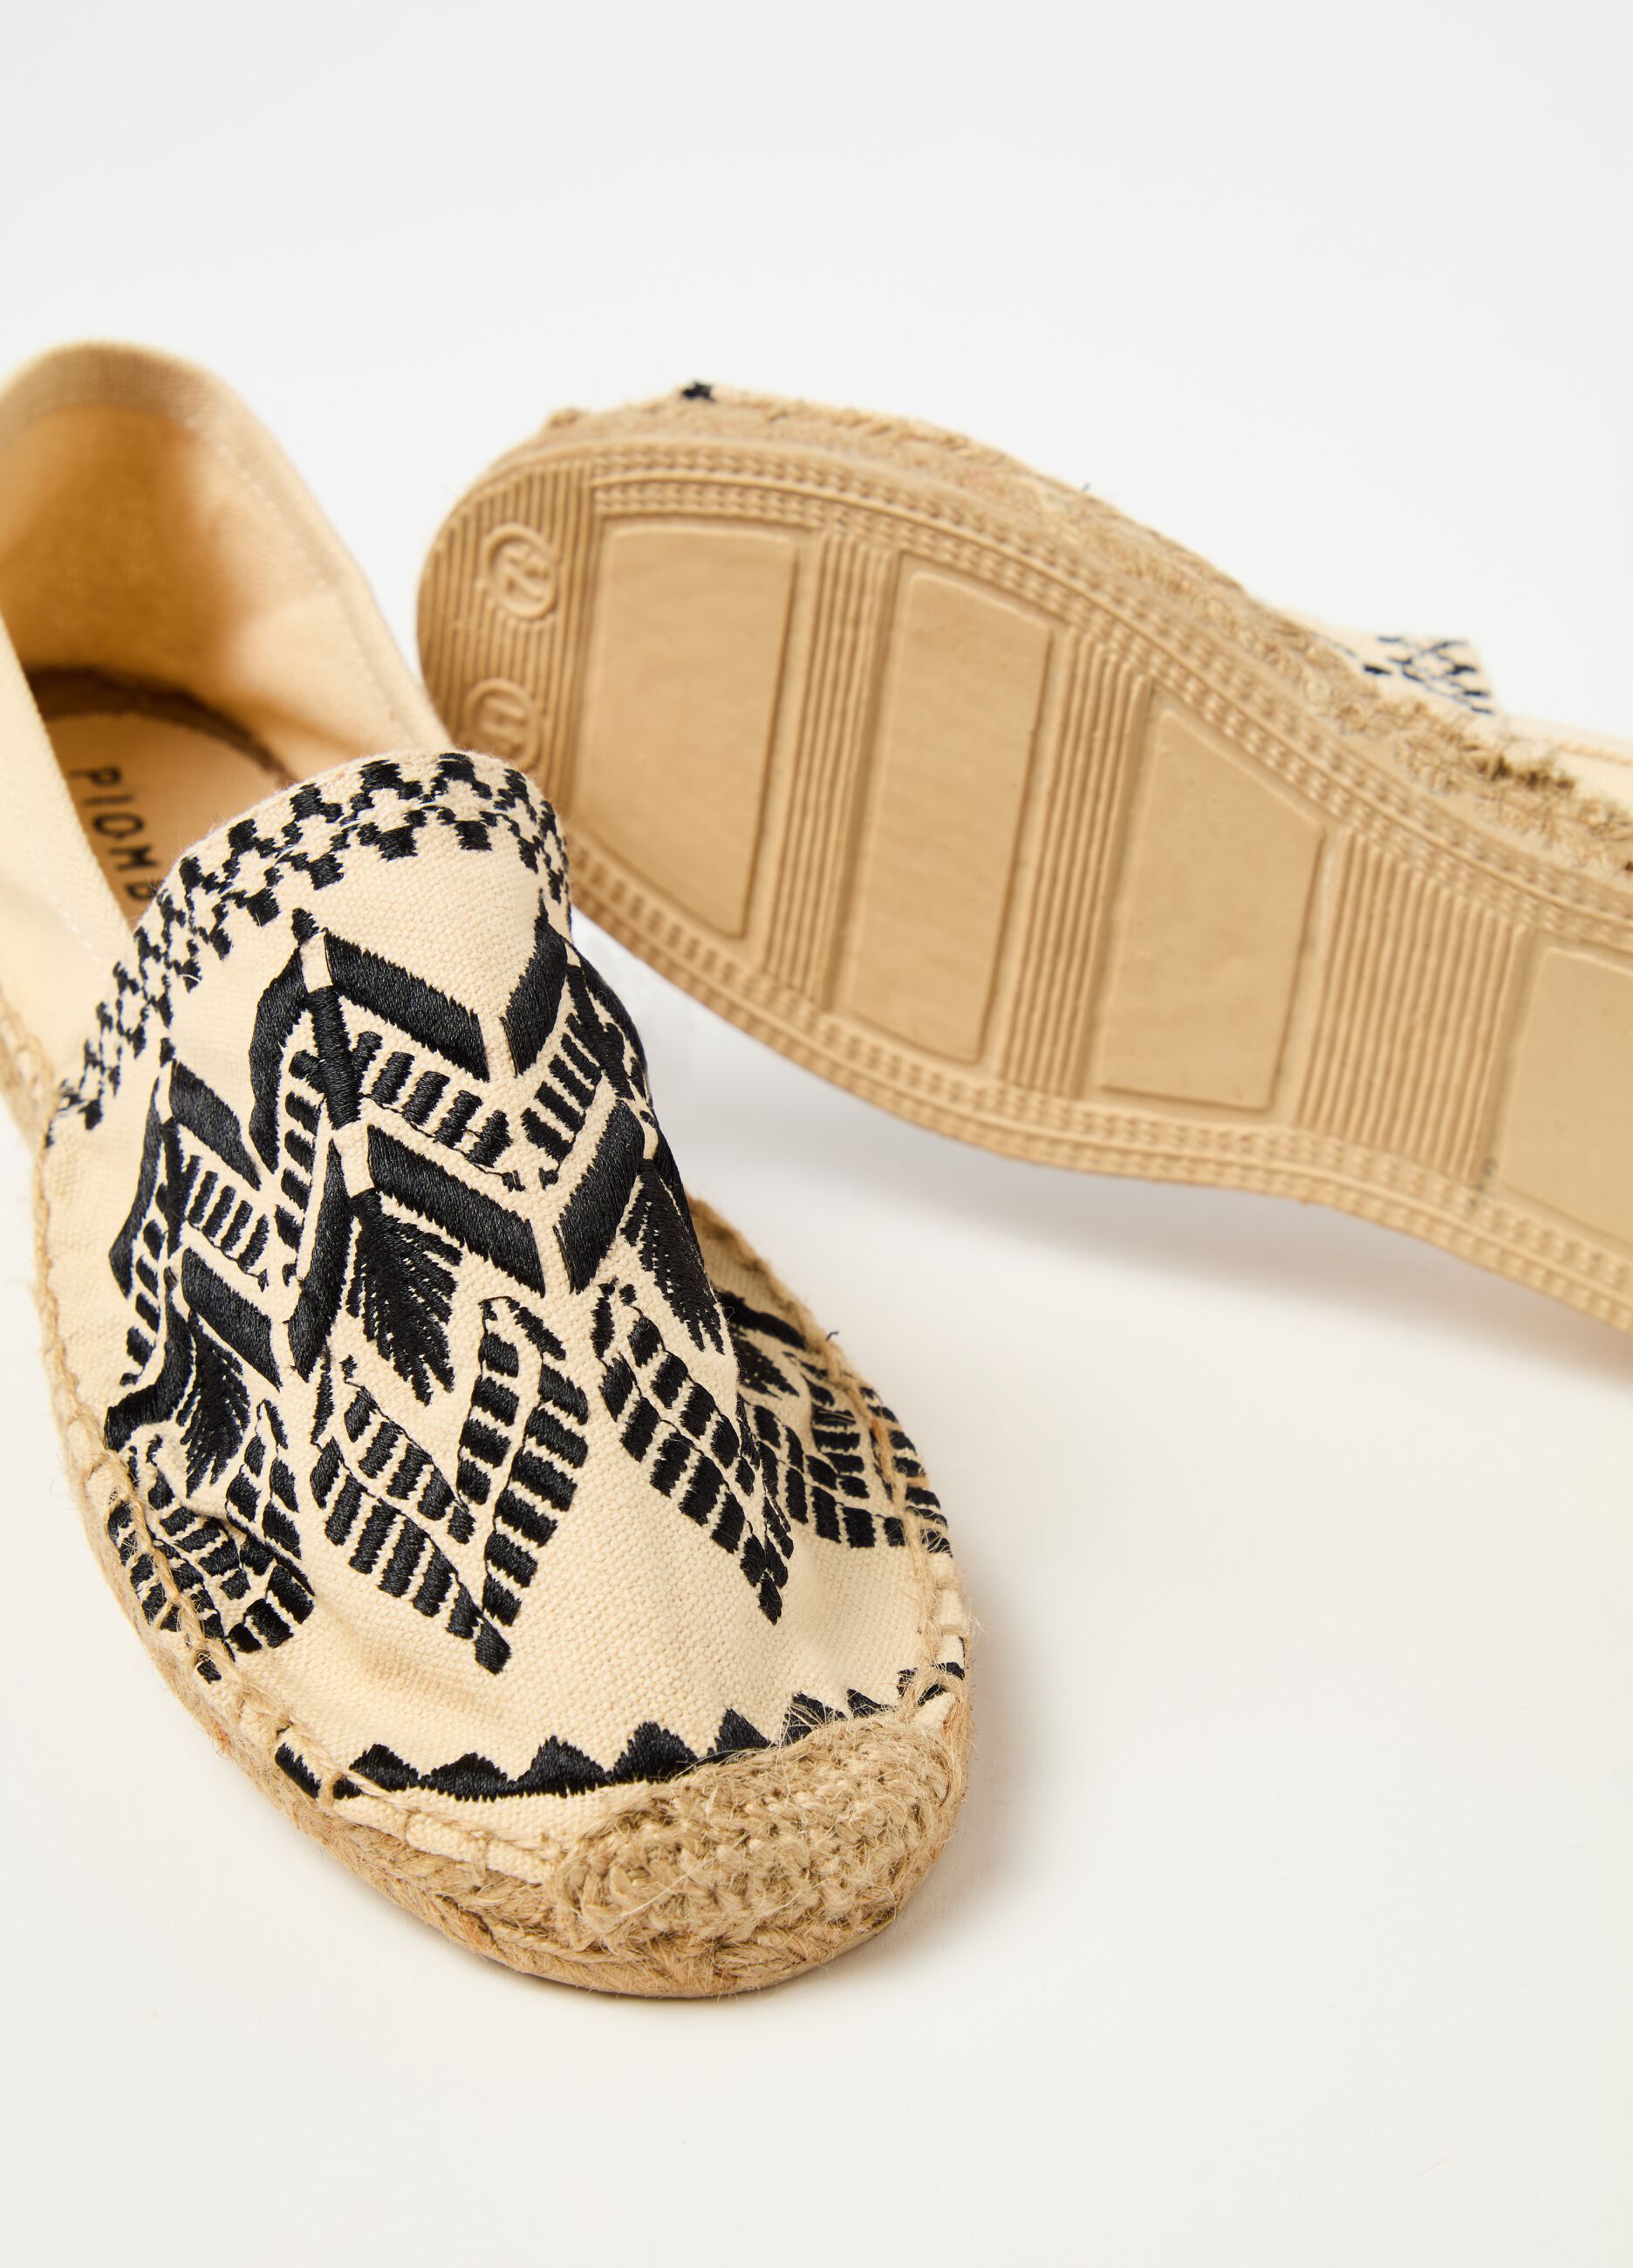 Espadrilles with ethnic embroidery